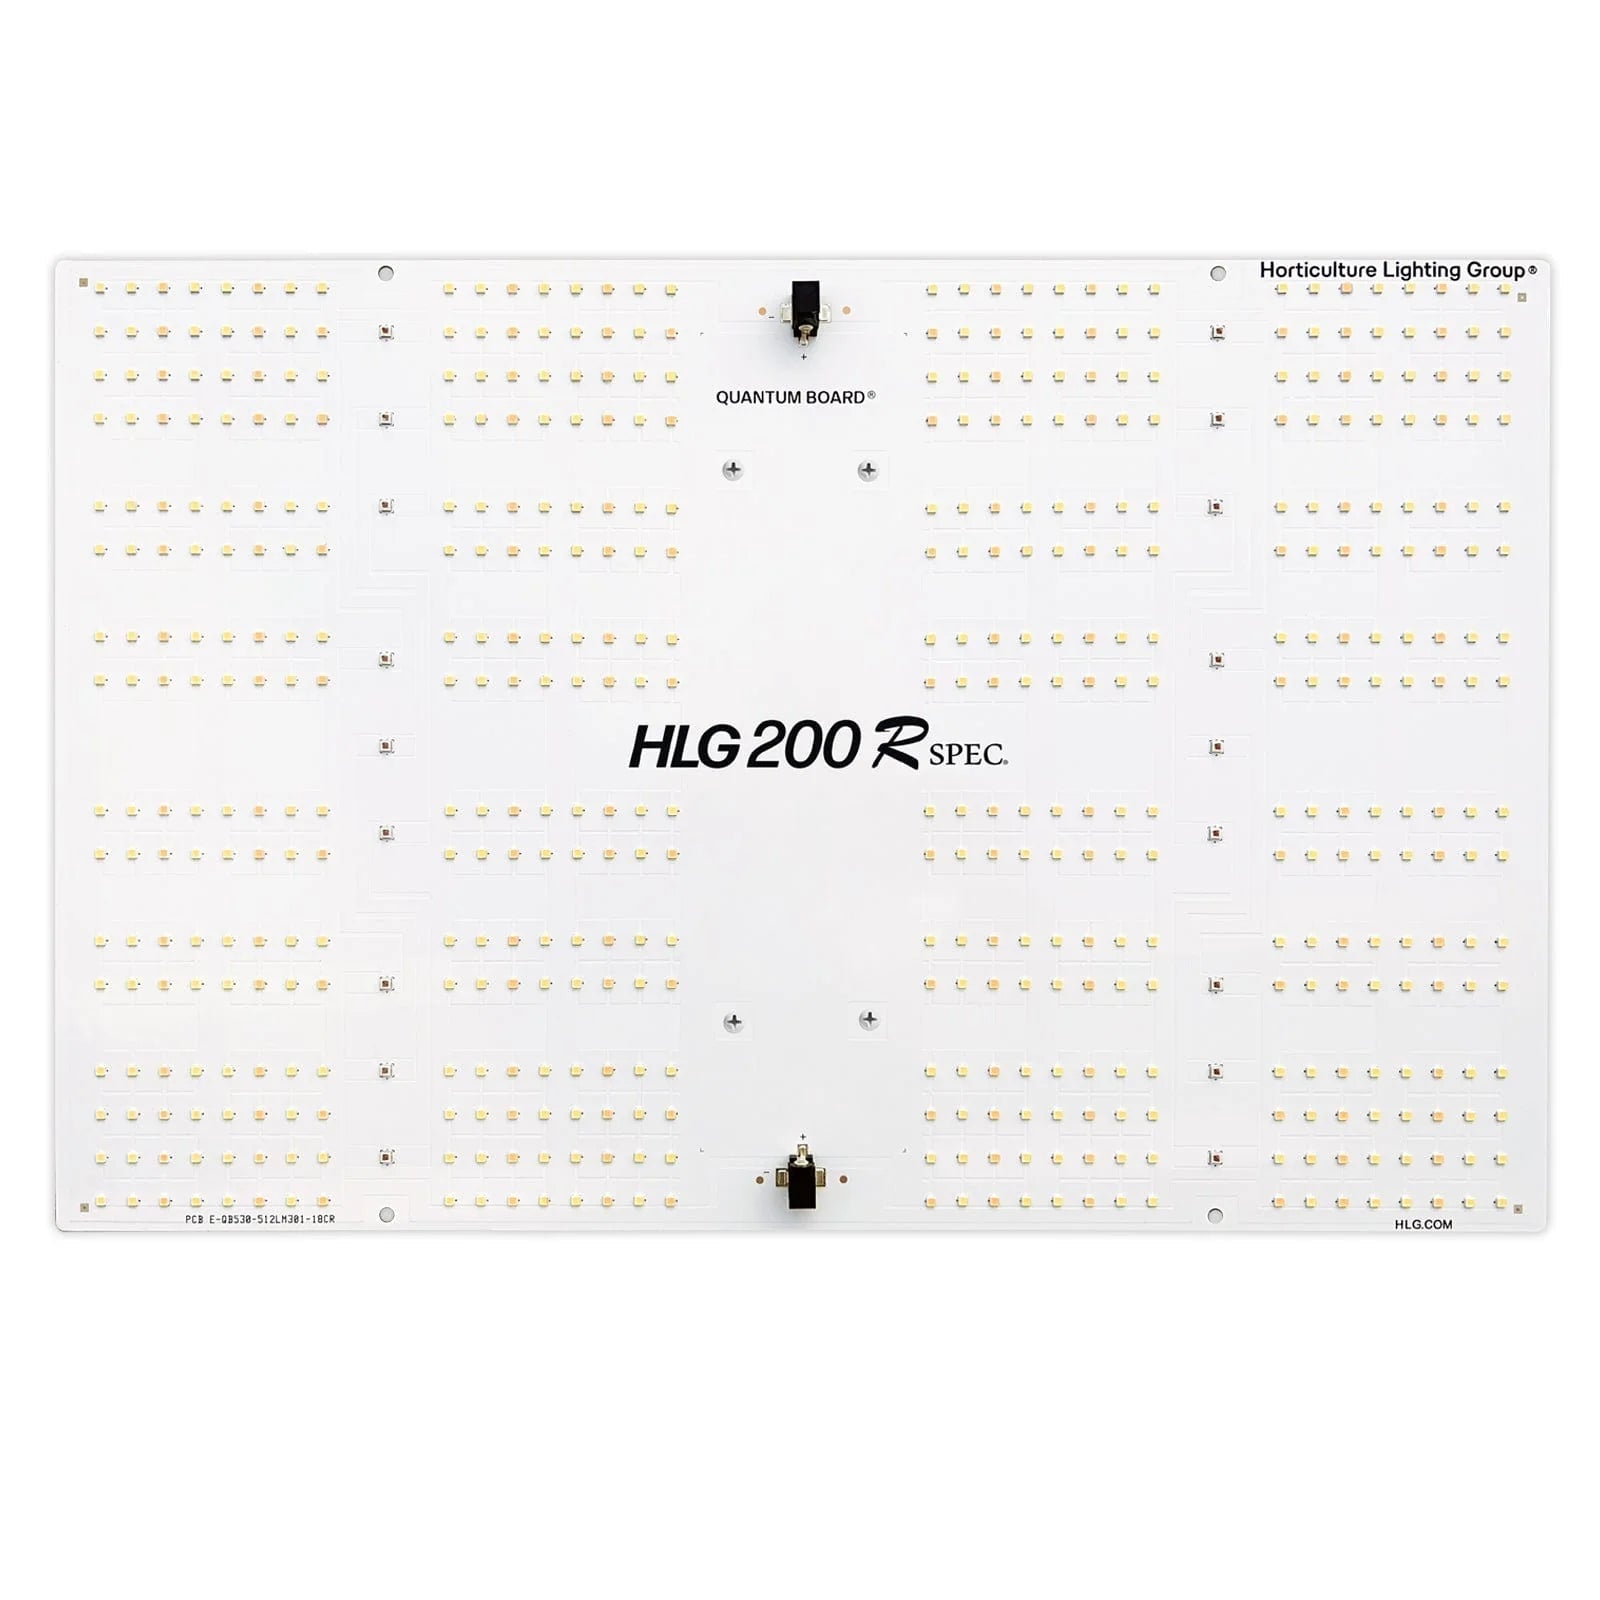 HLG 200 Rspec LED Grow Light - Horticulture Lighting Group - Happy Hydro